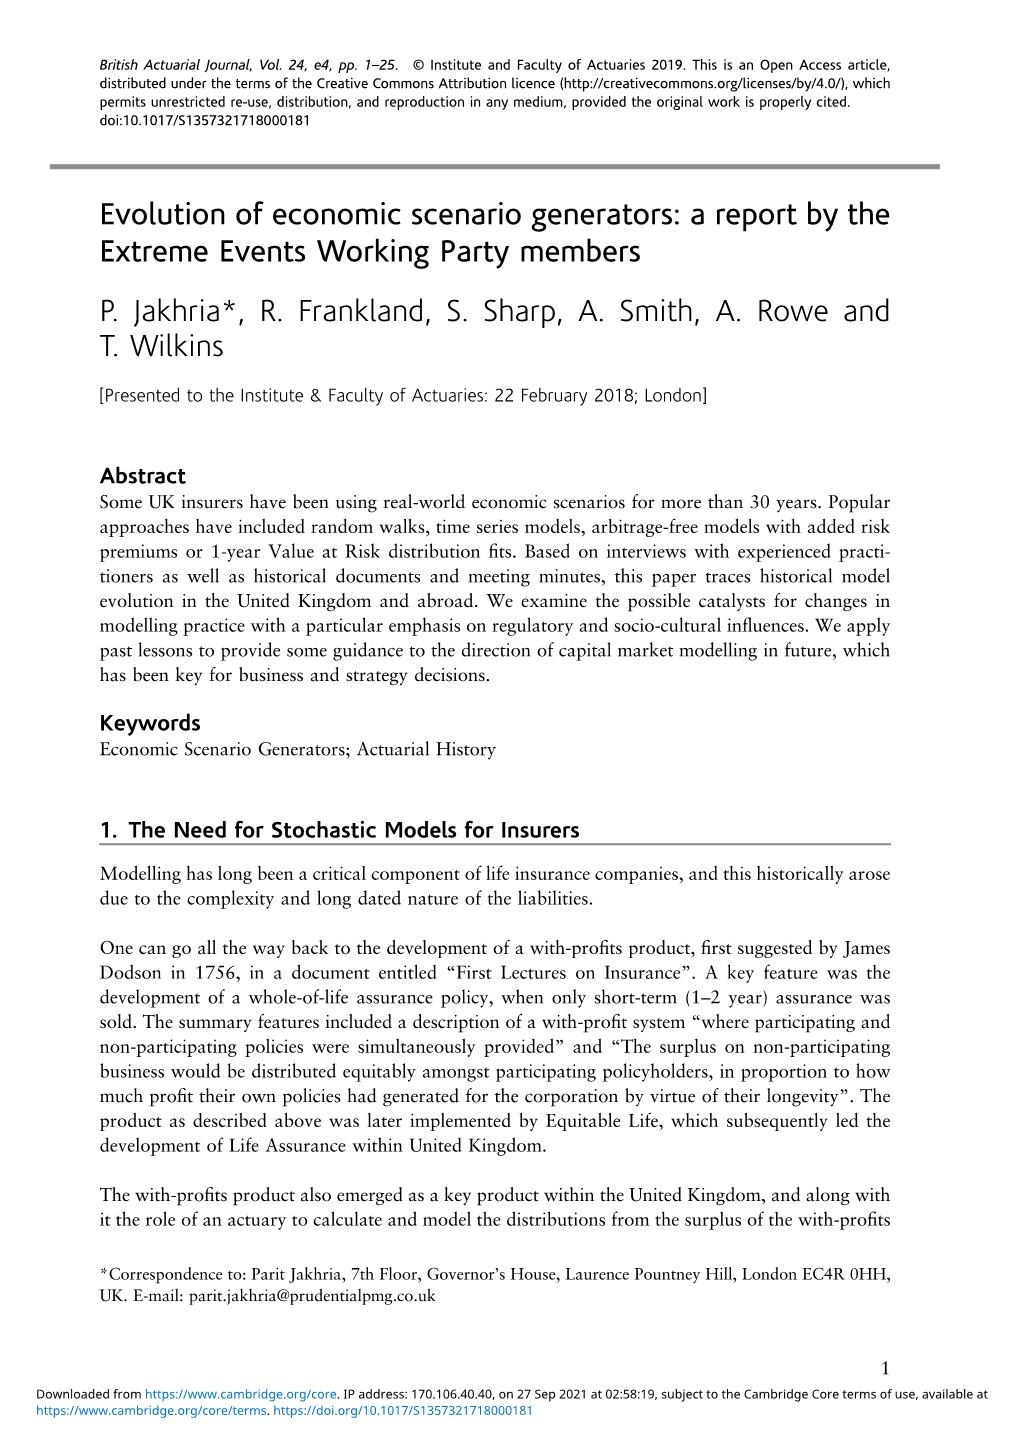 Evolution of Economic Scenario Generators: a Report by the Extreme Events Working Party Members P